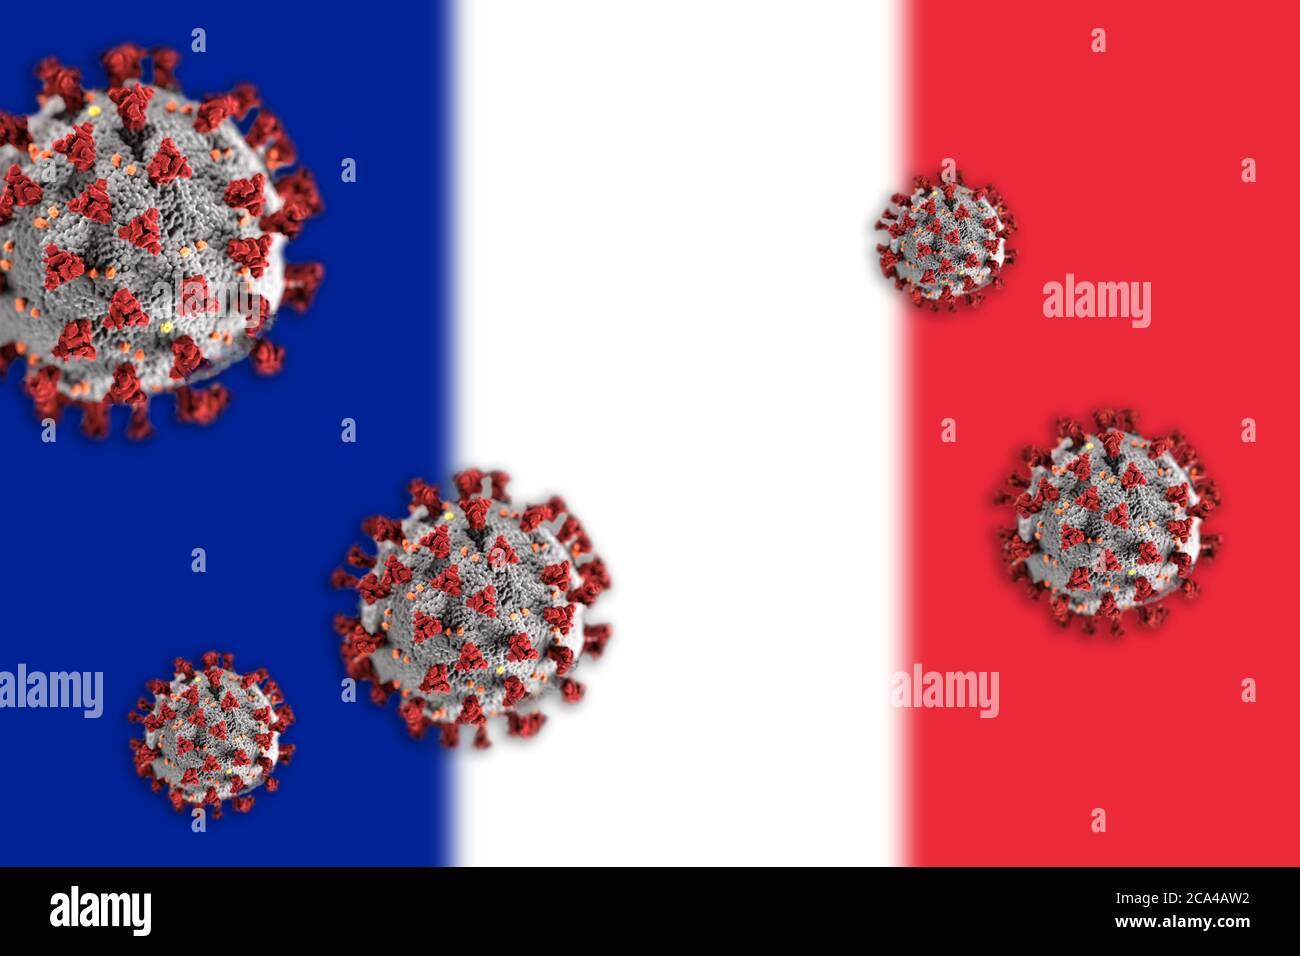 Concept of Coronavirus or Covid-19 particles overshadowing blurred flag of France in background. Stock Photo